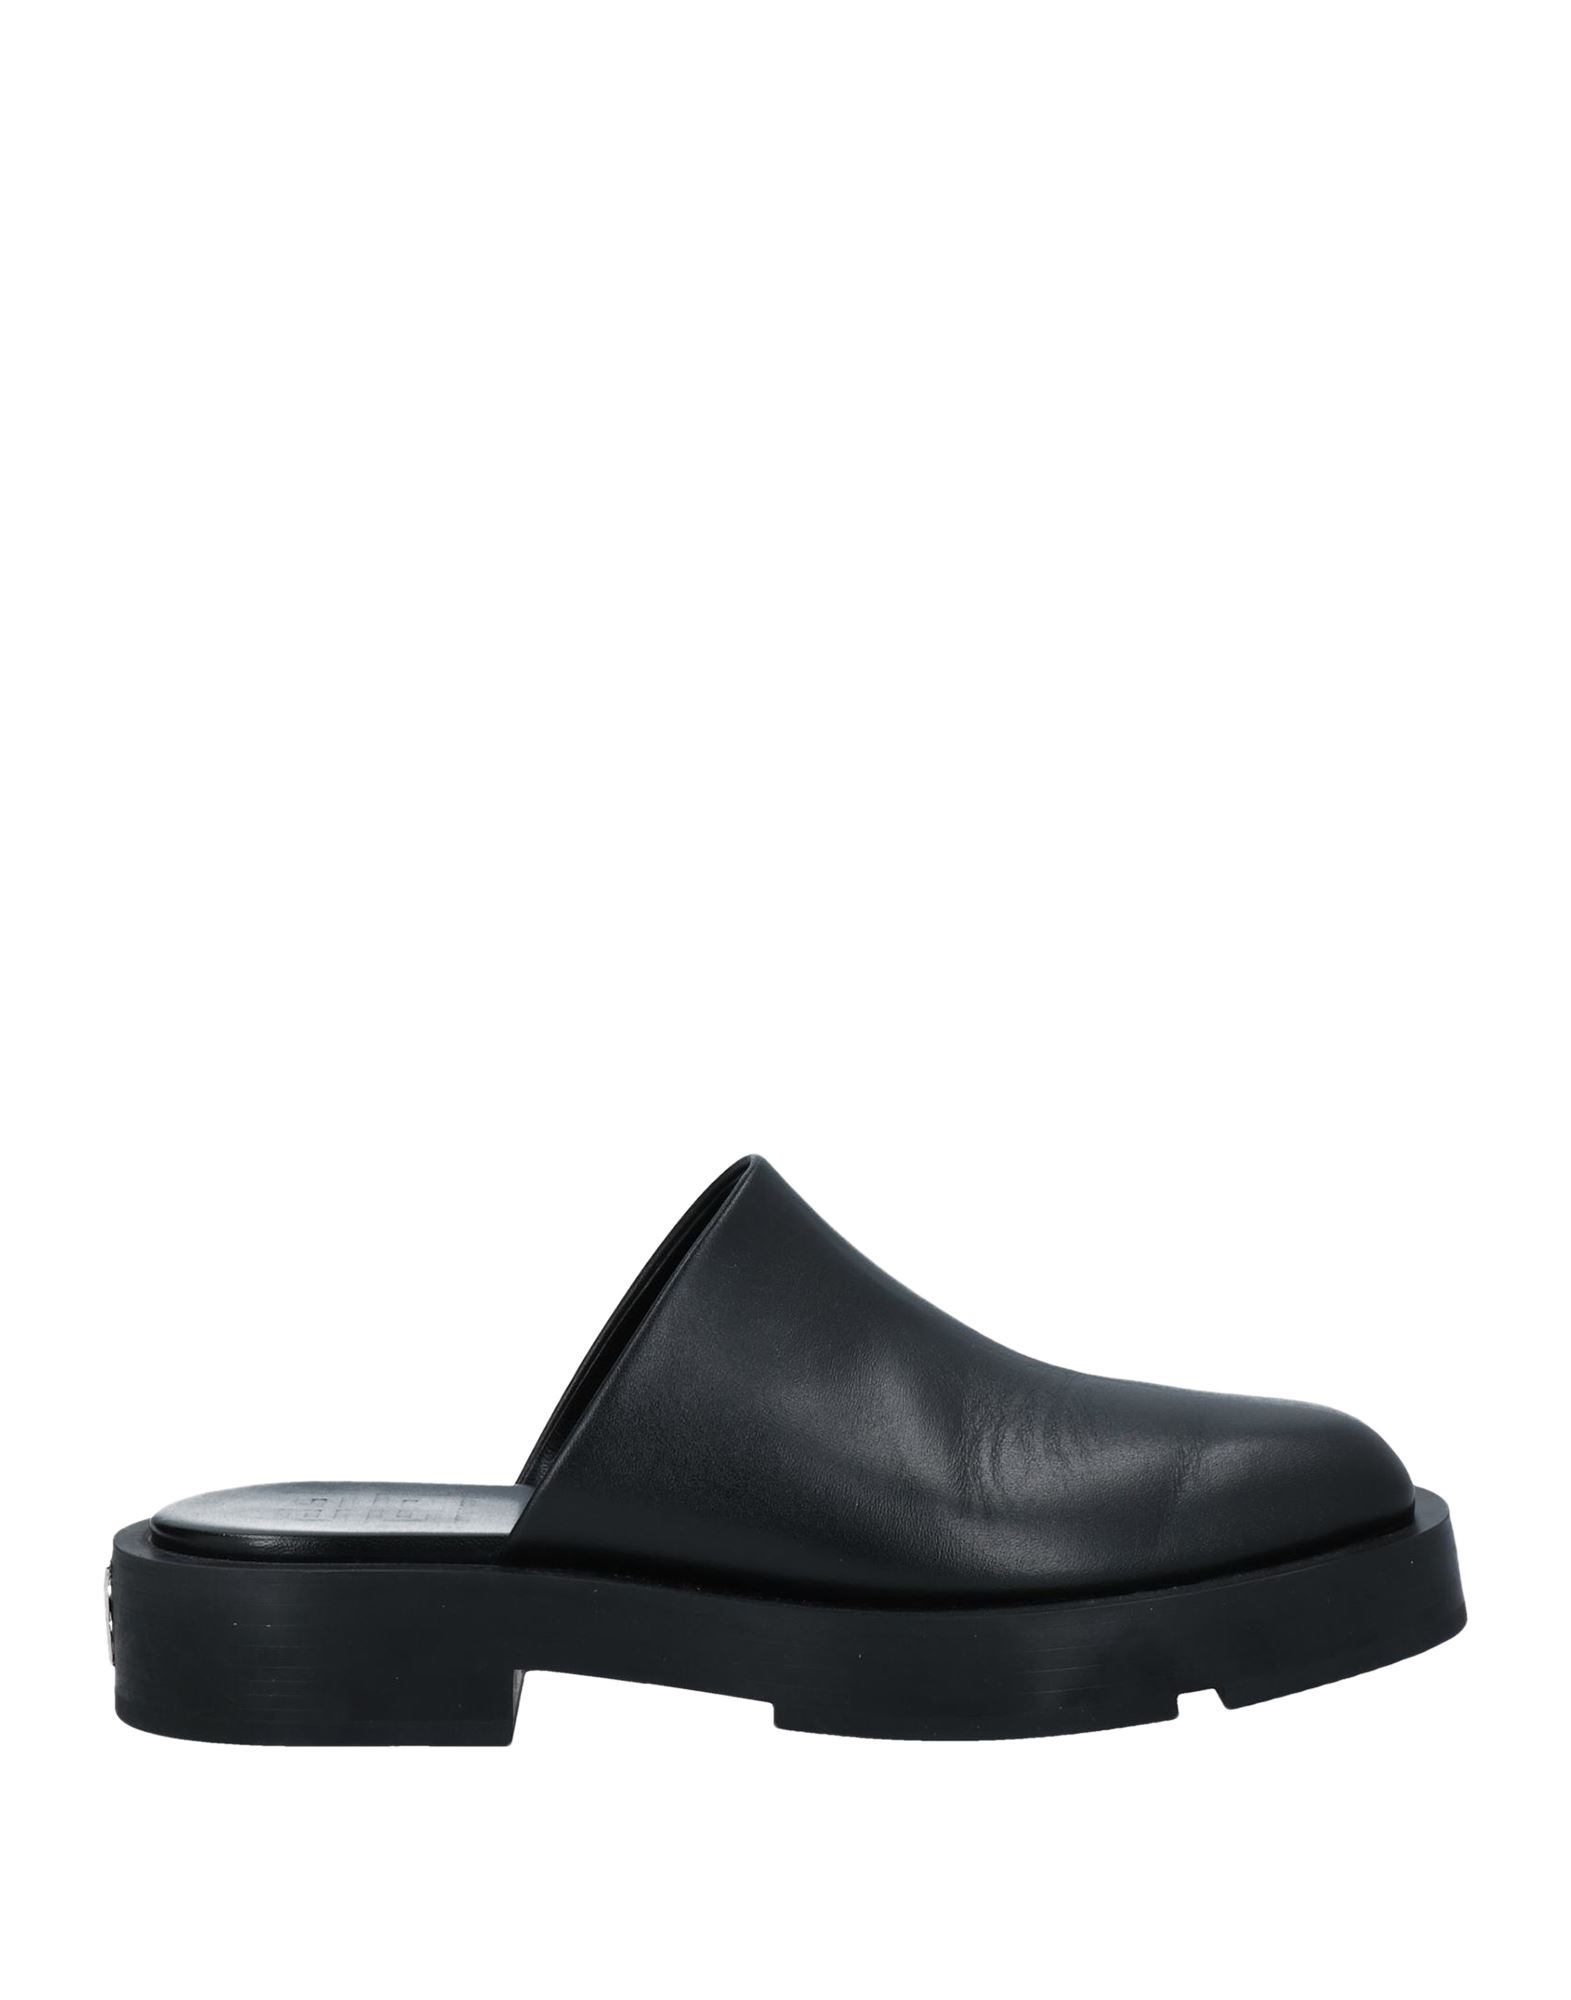 GIVENCHY Mules for Women | ModeSens